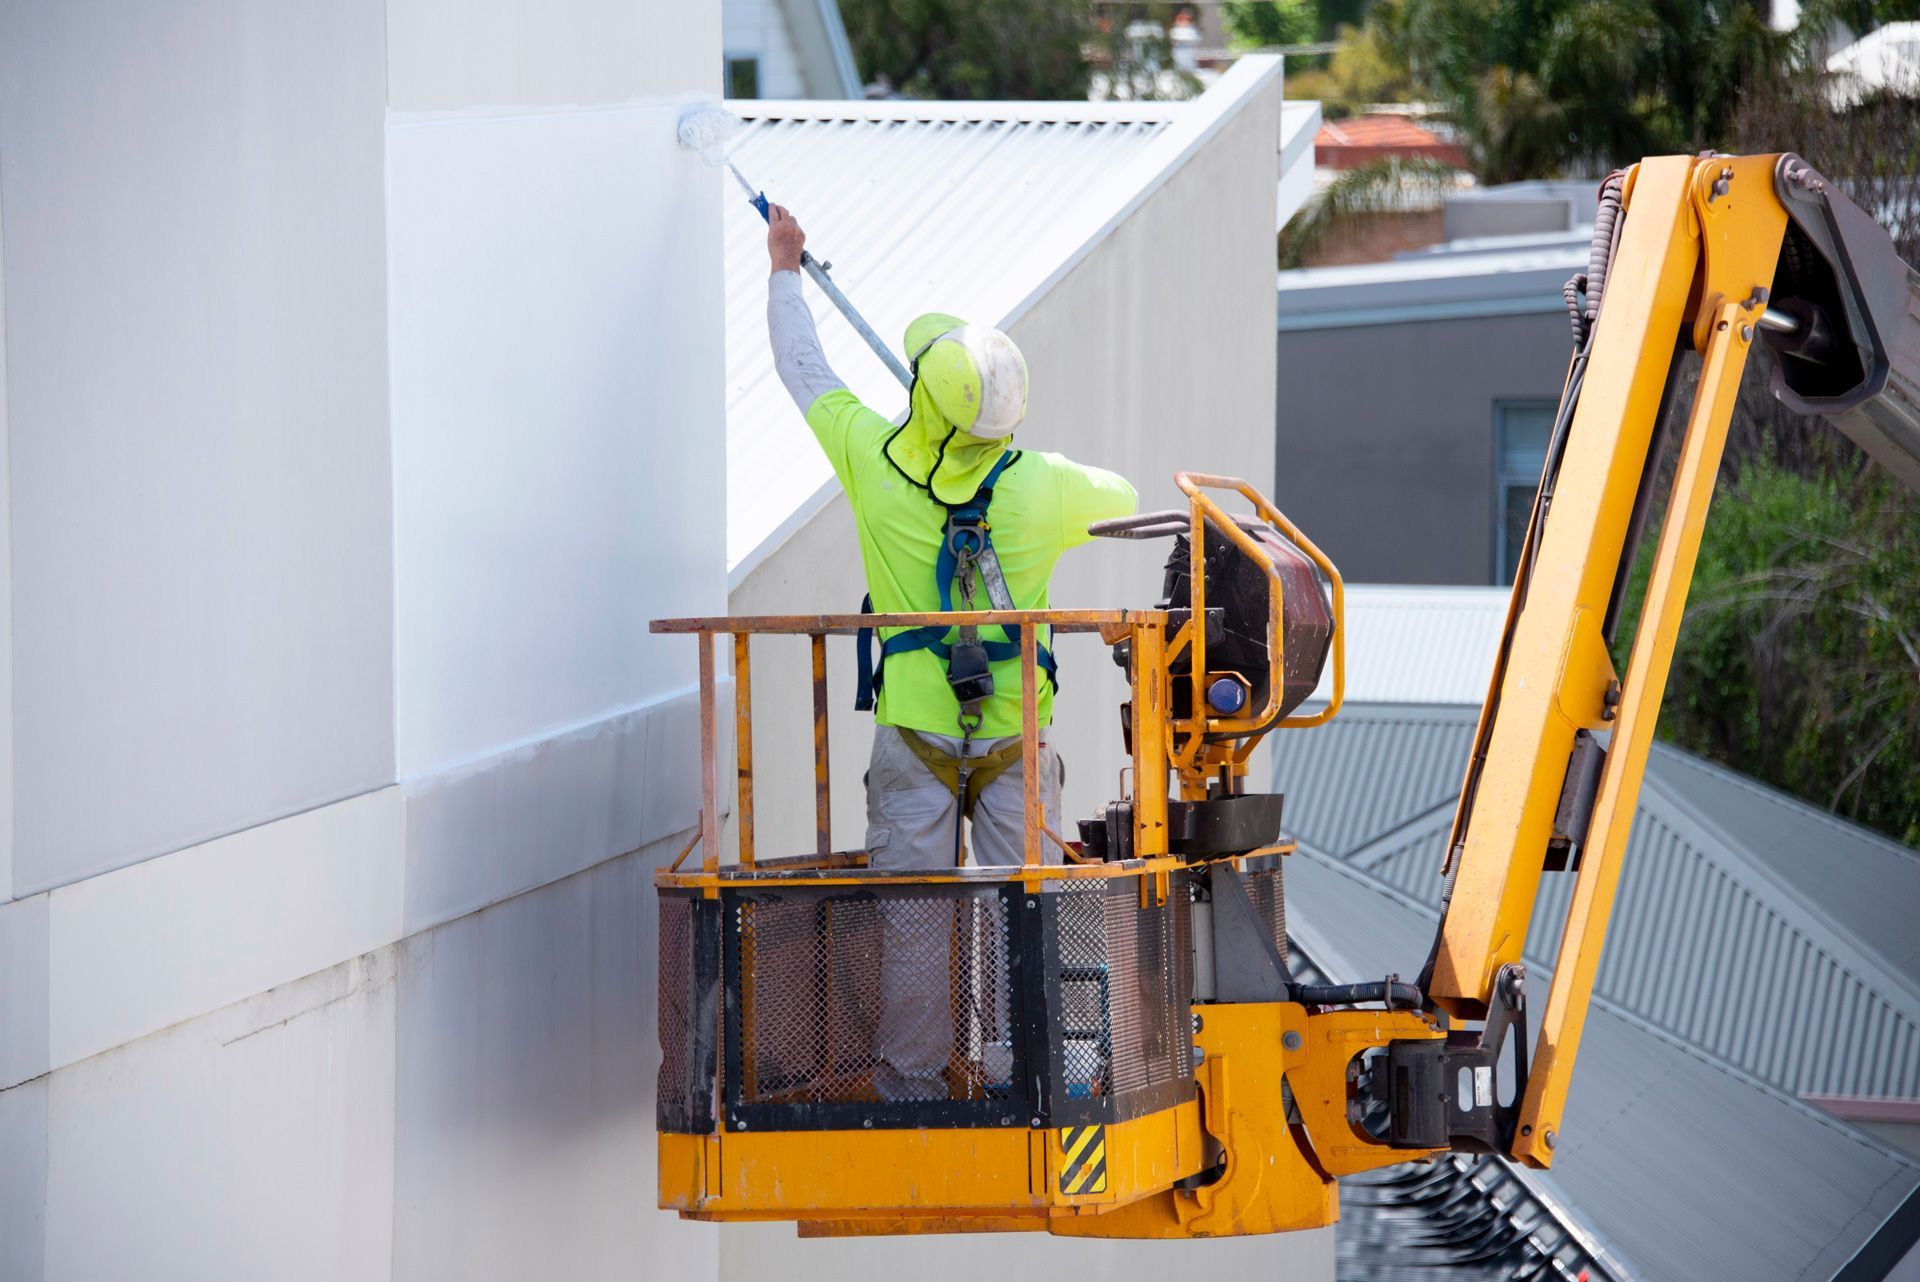 A man is painting a building from a crane